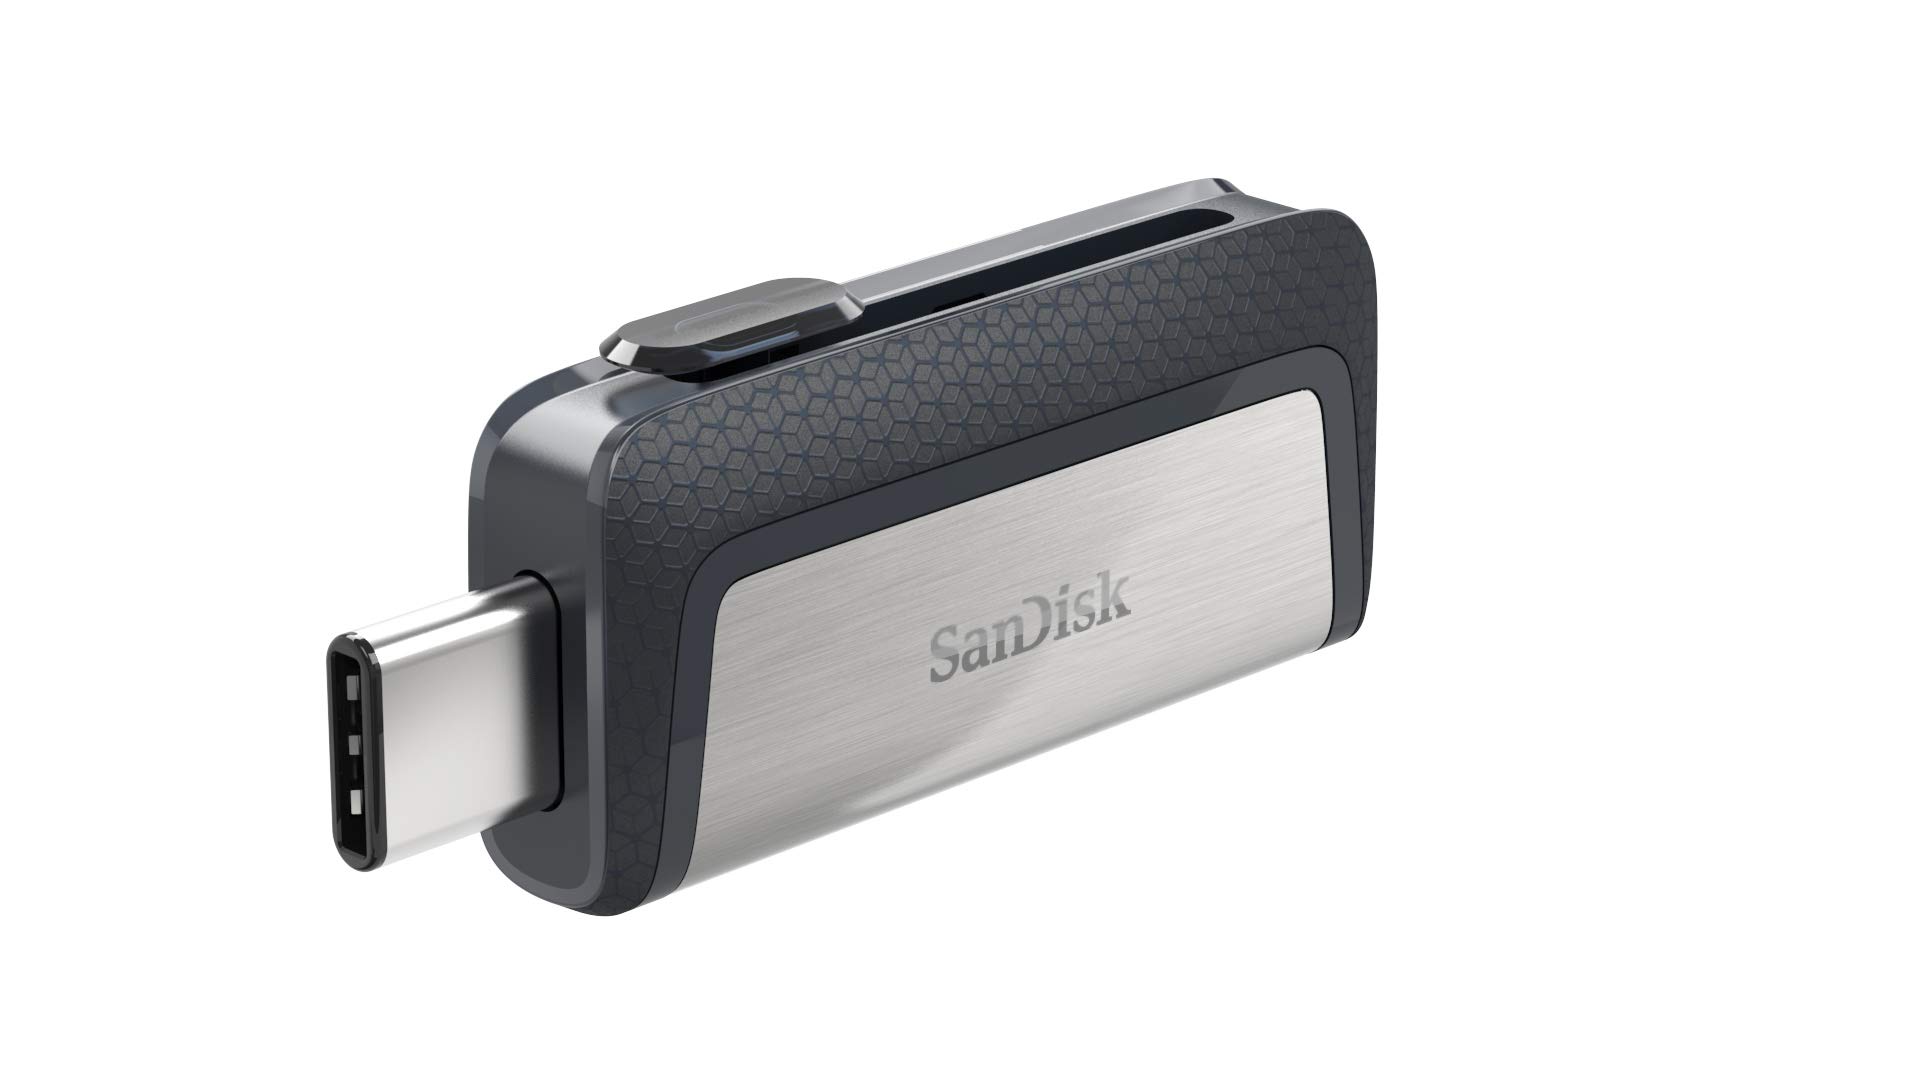 128GB SanDisk Ultra Dual Drive Flash Drive (USB Type-C and USB 3.1 Connectors) $11 + Free Shipping w/ Prime or on $35+